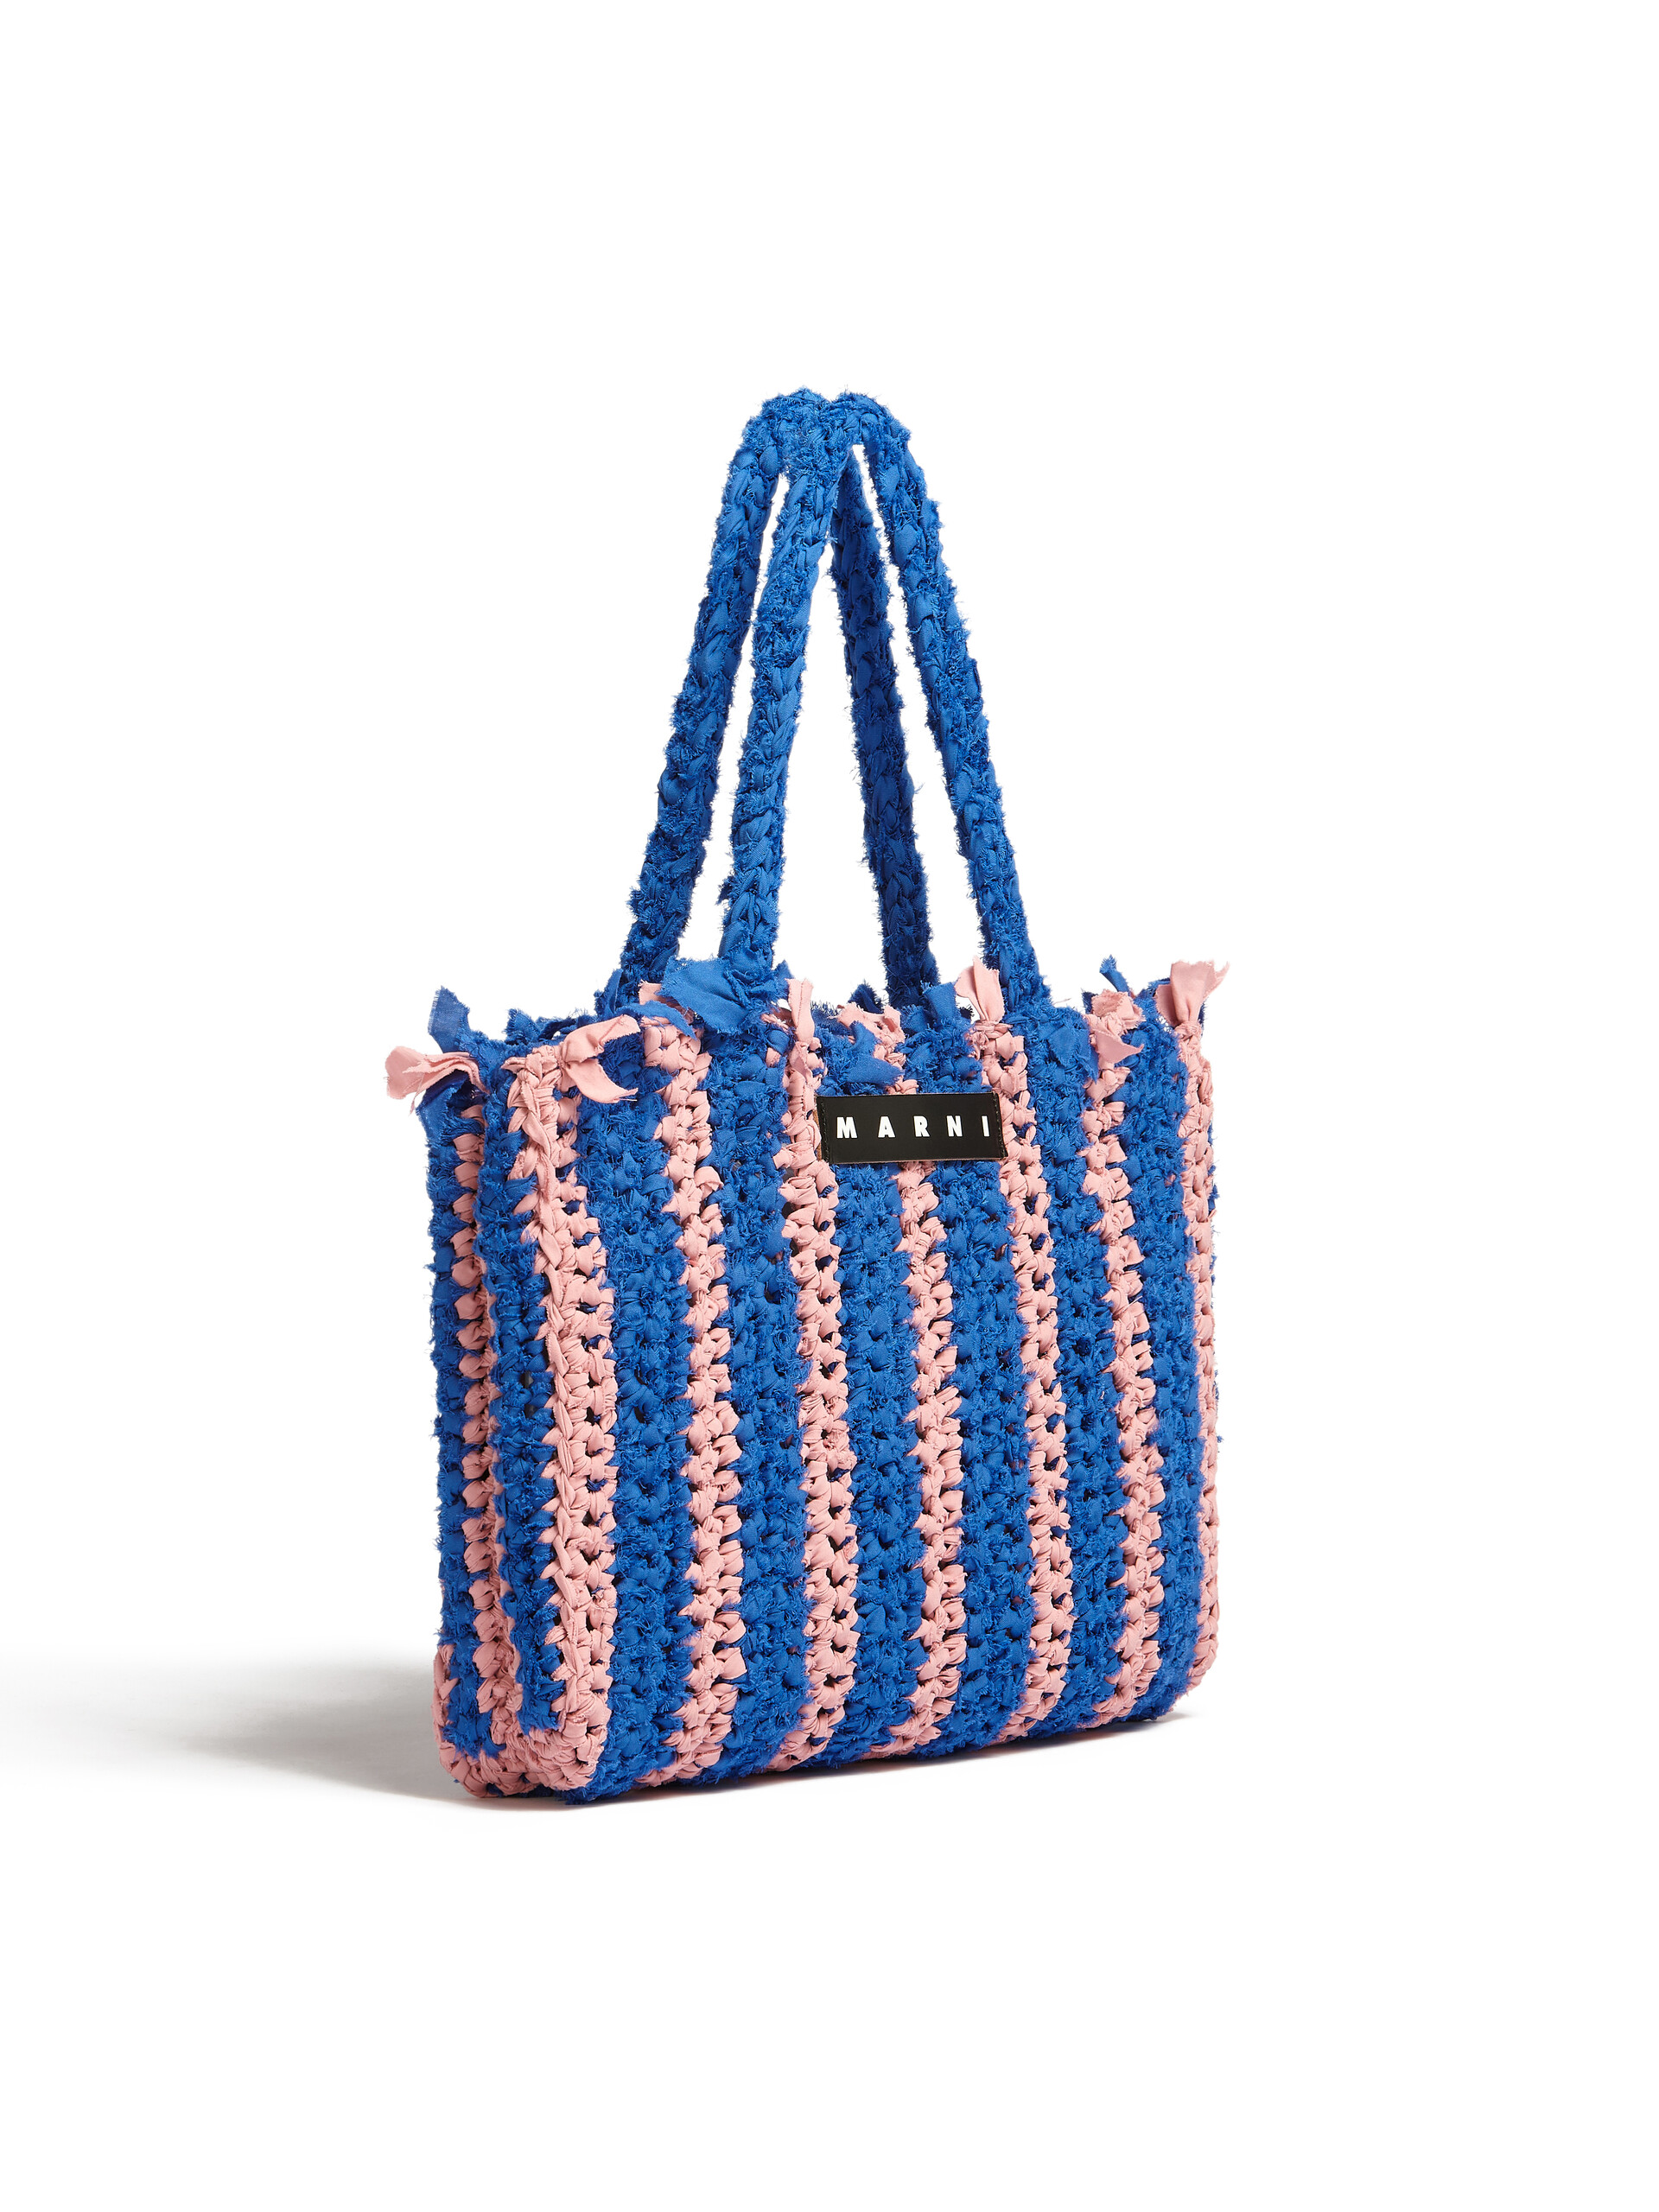 Pink and blue cotton MARNI MARKET bag - Bags - Image 2